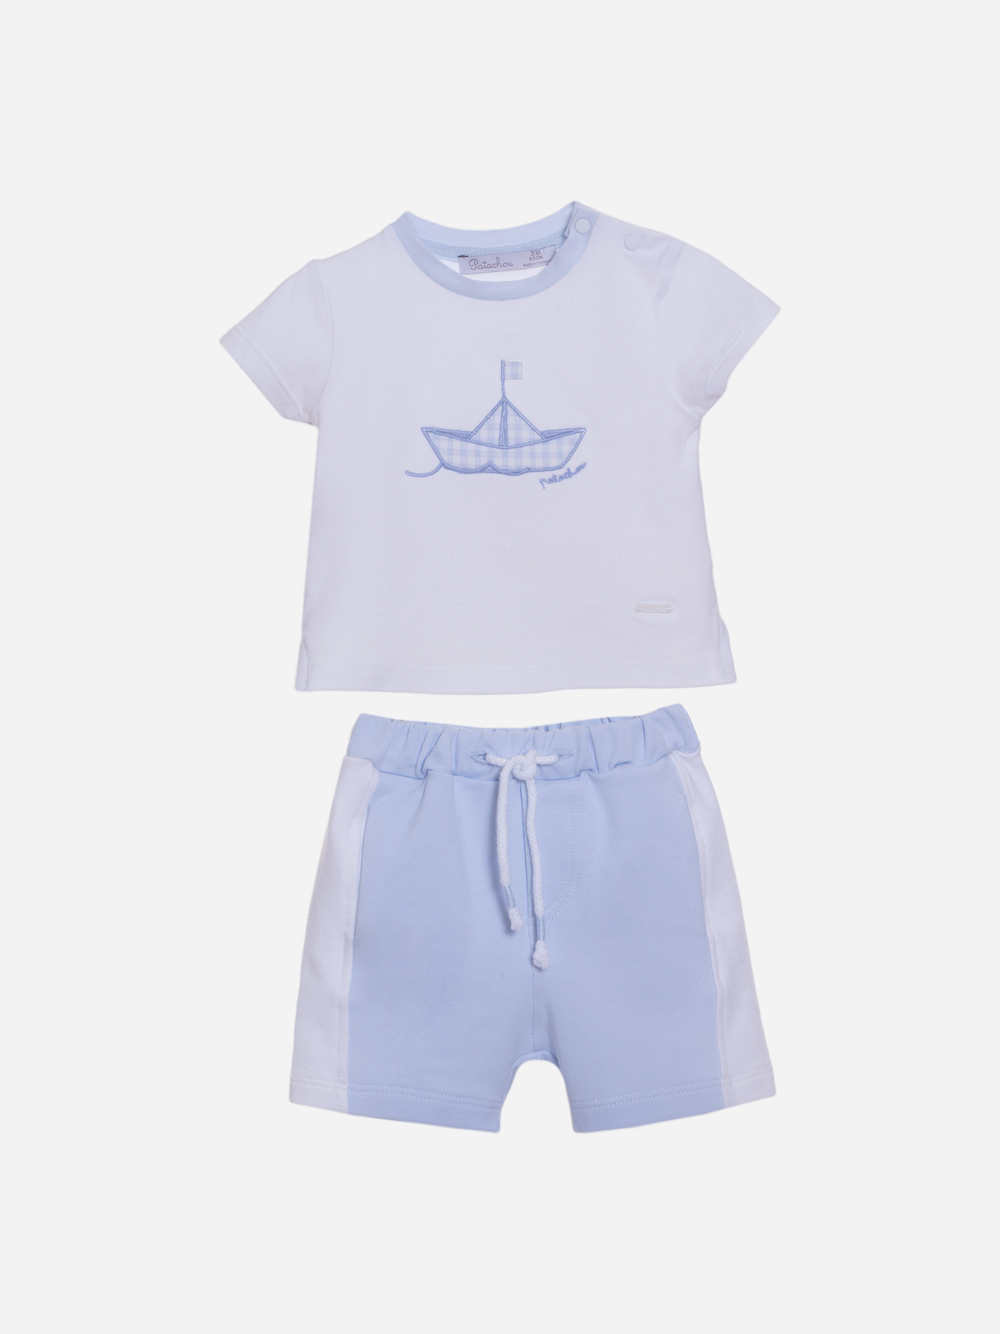 White and blue baby boy set